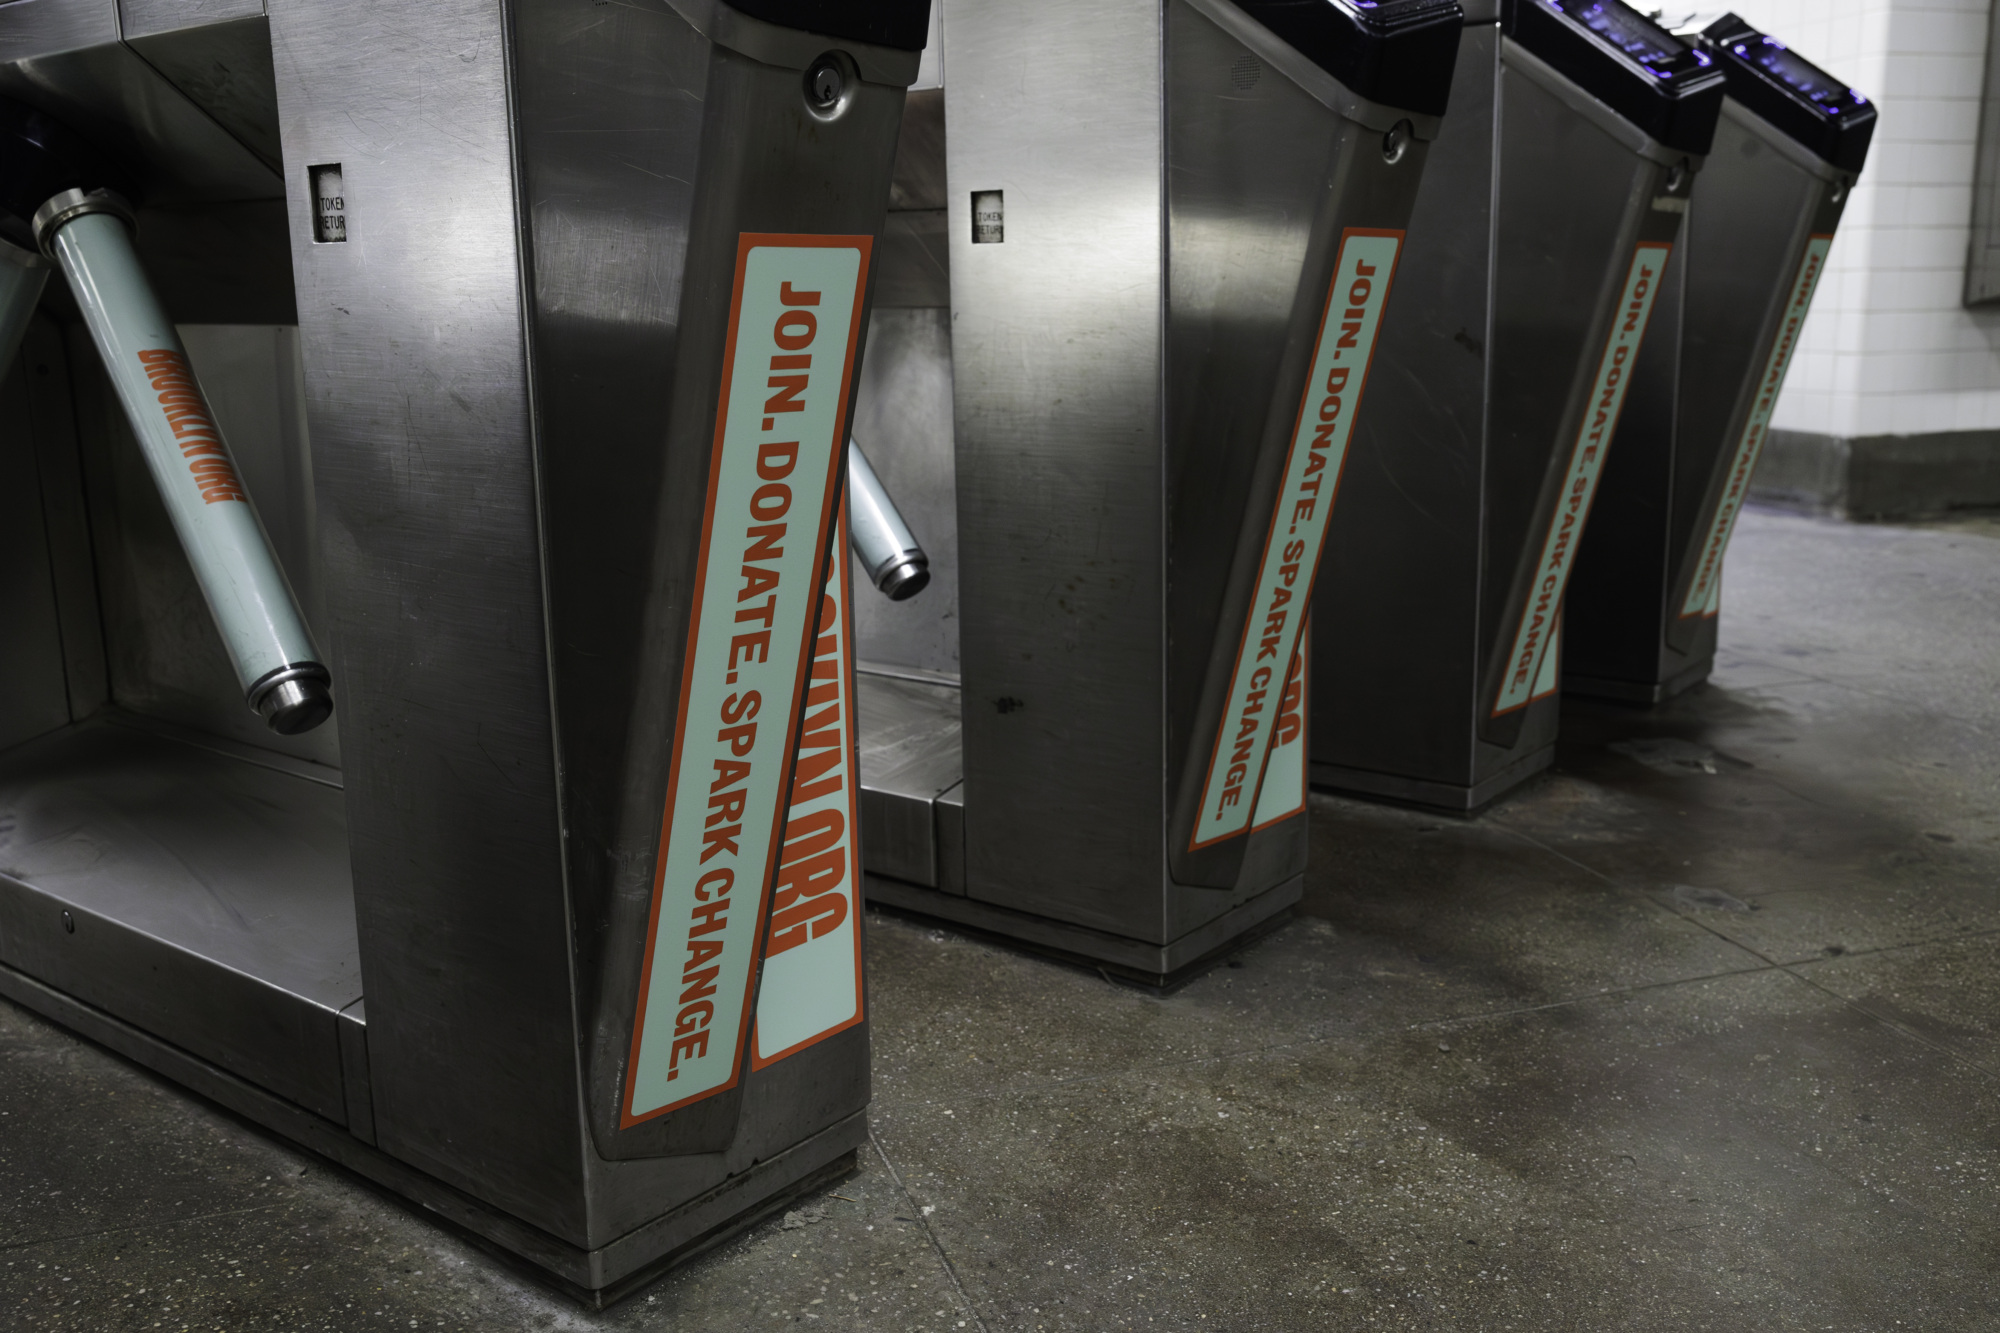 A row of subway turnstiles with orange and white advertisements reading "Join. Donate. Spark Change." and a website link on a gray tiled floor in a subway station.